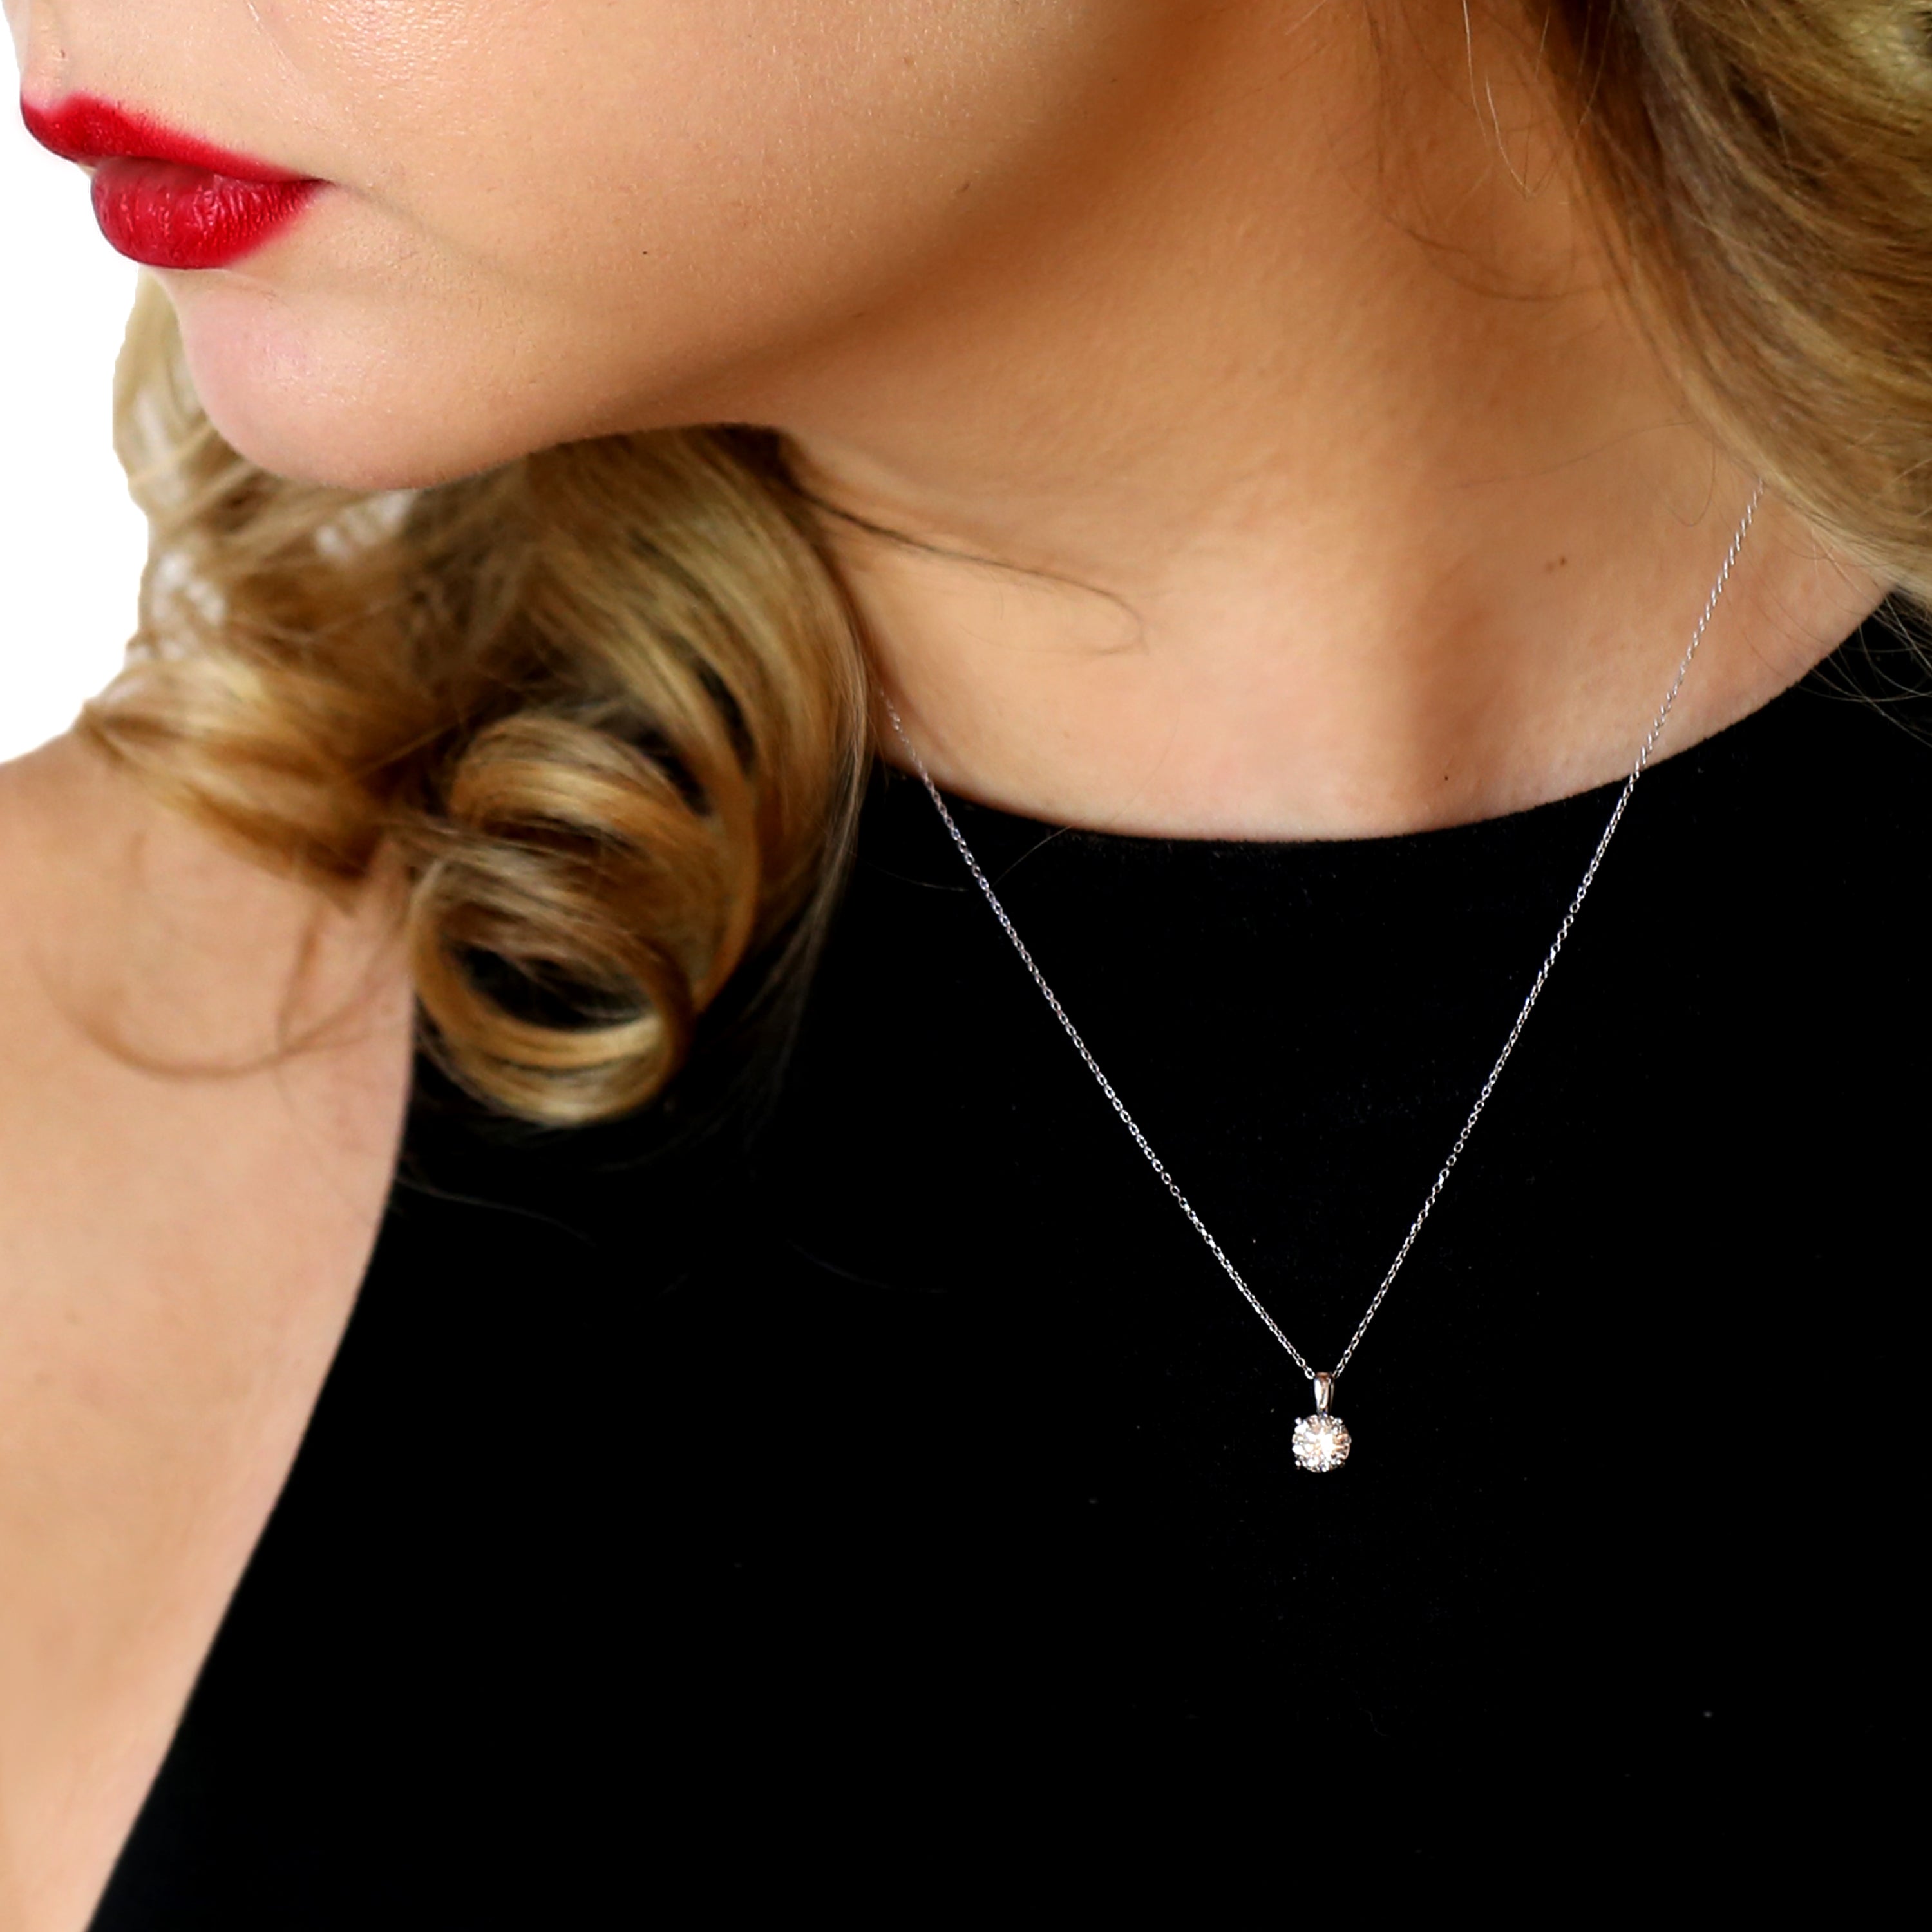 A blonde woman with a black shirt wearing one of our solitaire pendant necklaces.